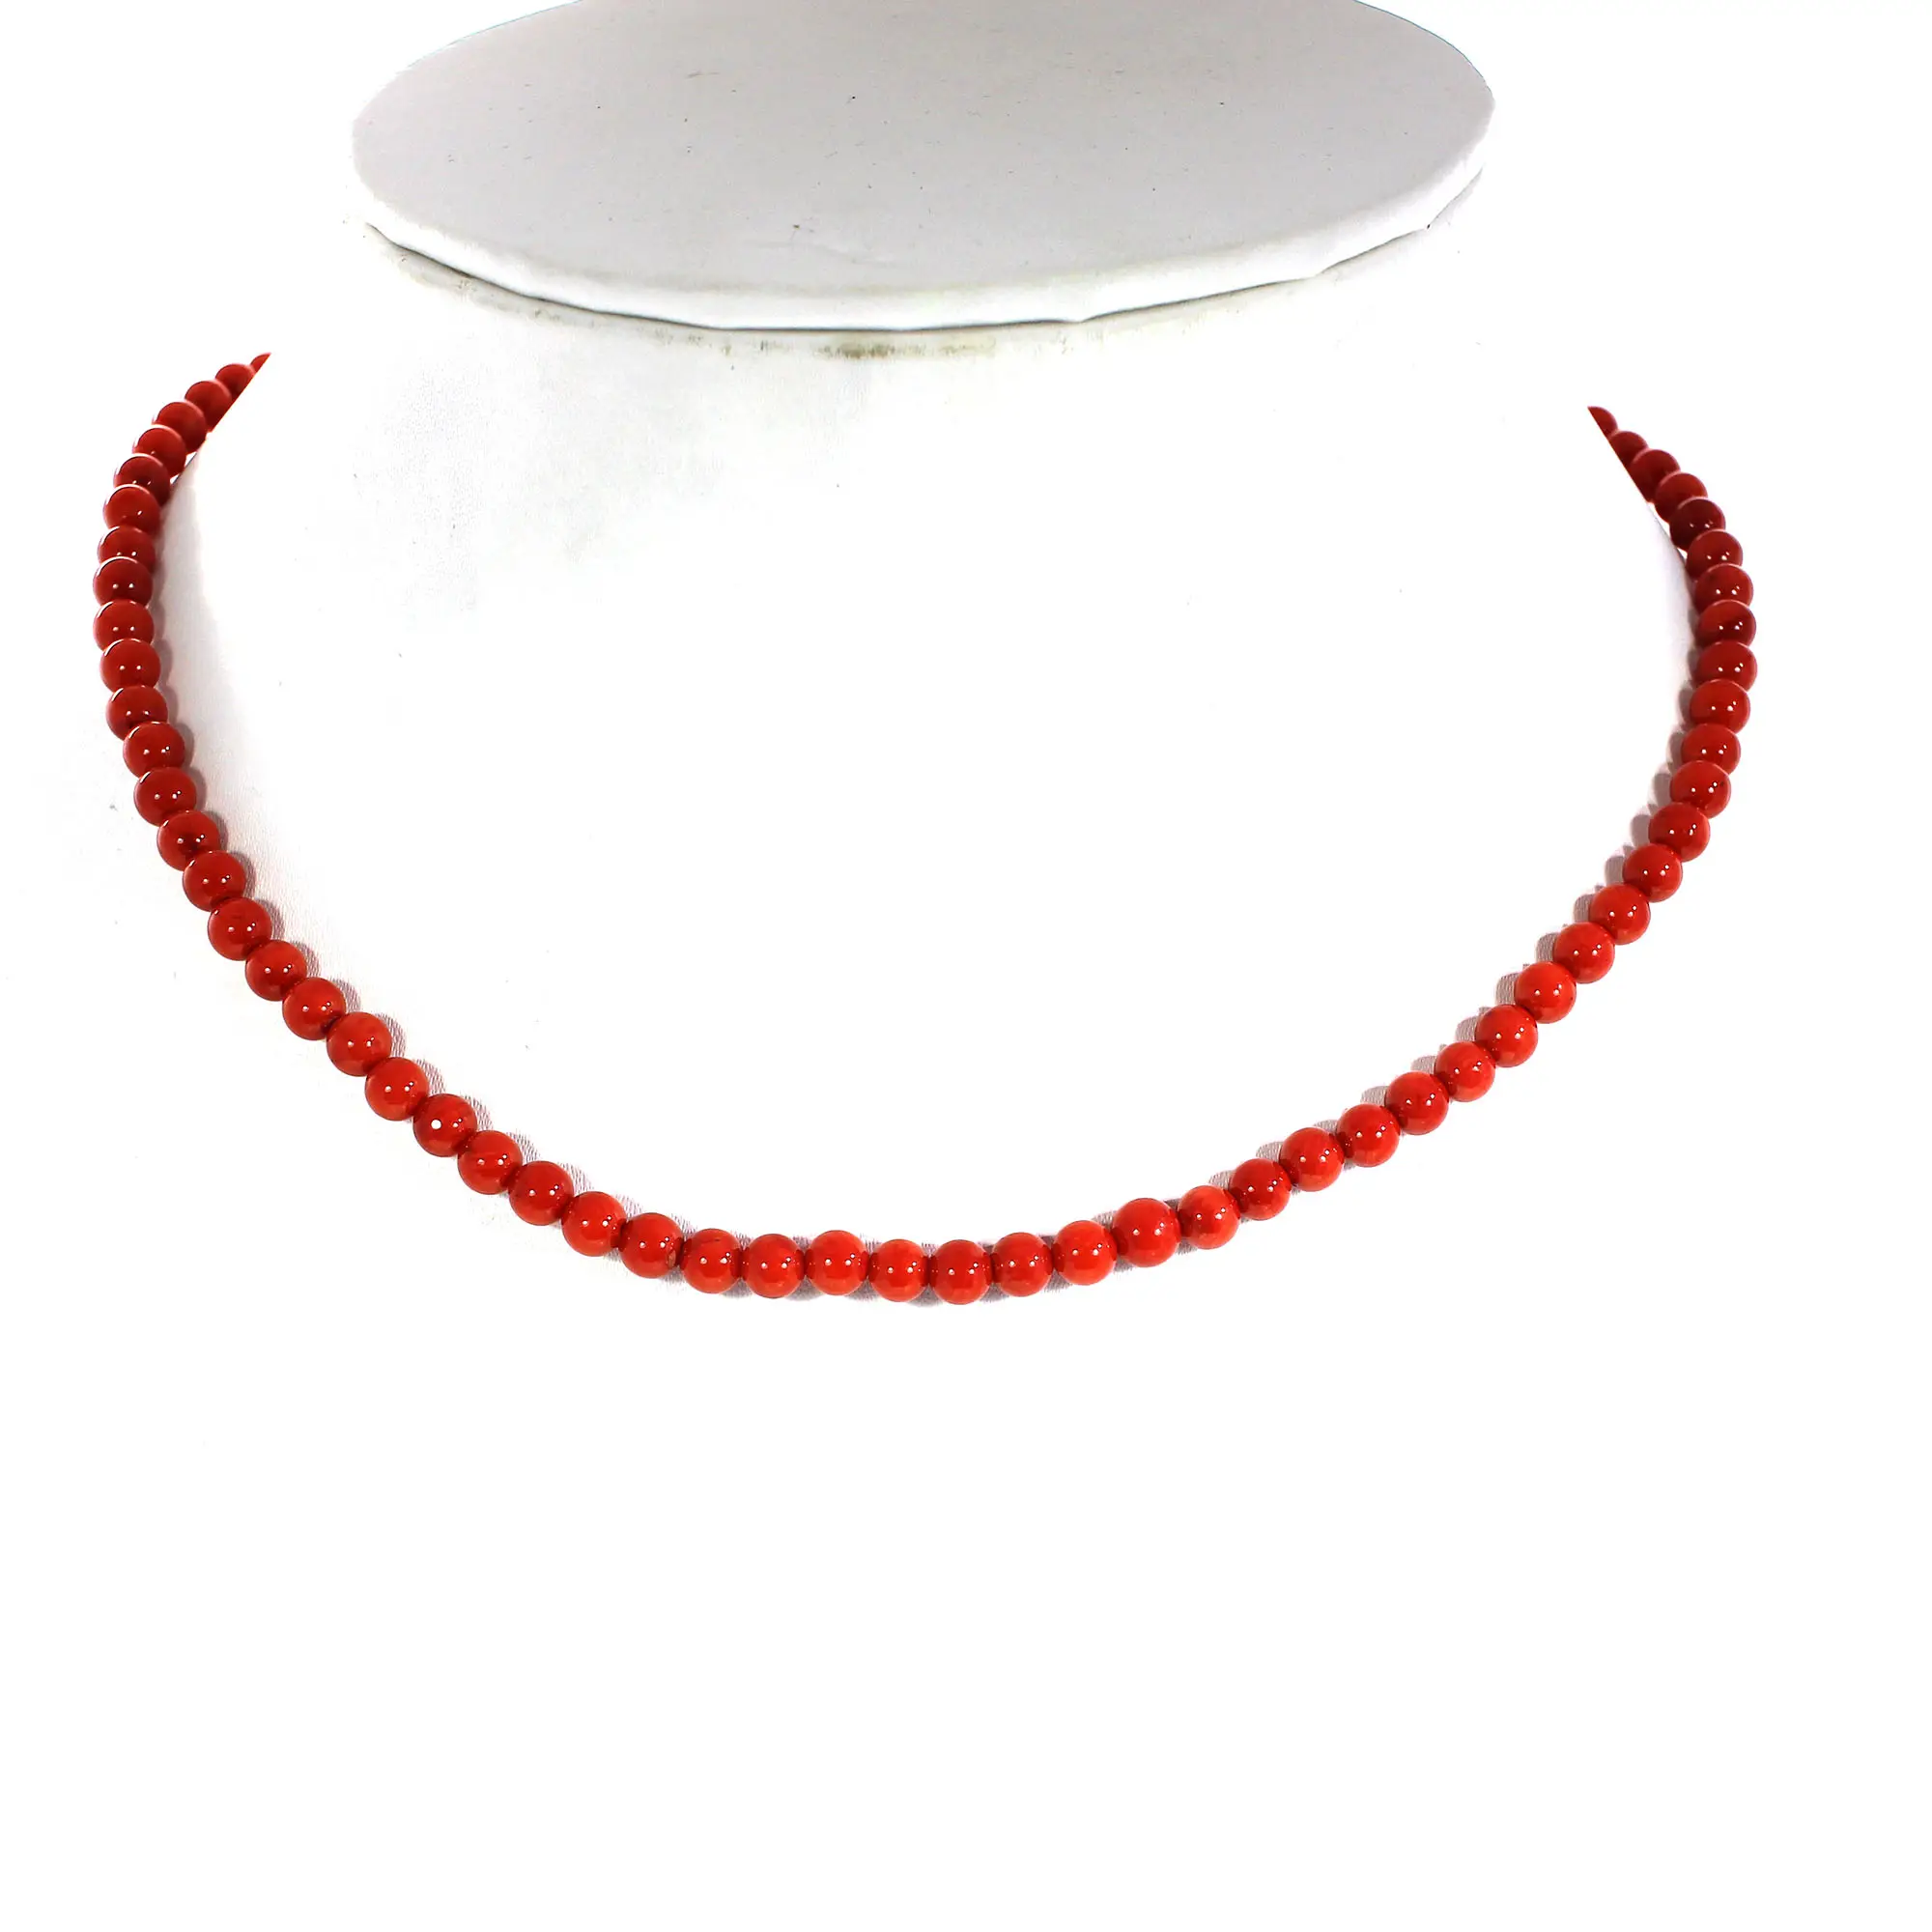 Natural Italian Coral 5mm Round Cabochon Loose Gemstone Beads 16 Inch Strand Necklace